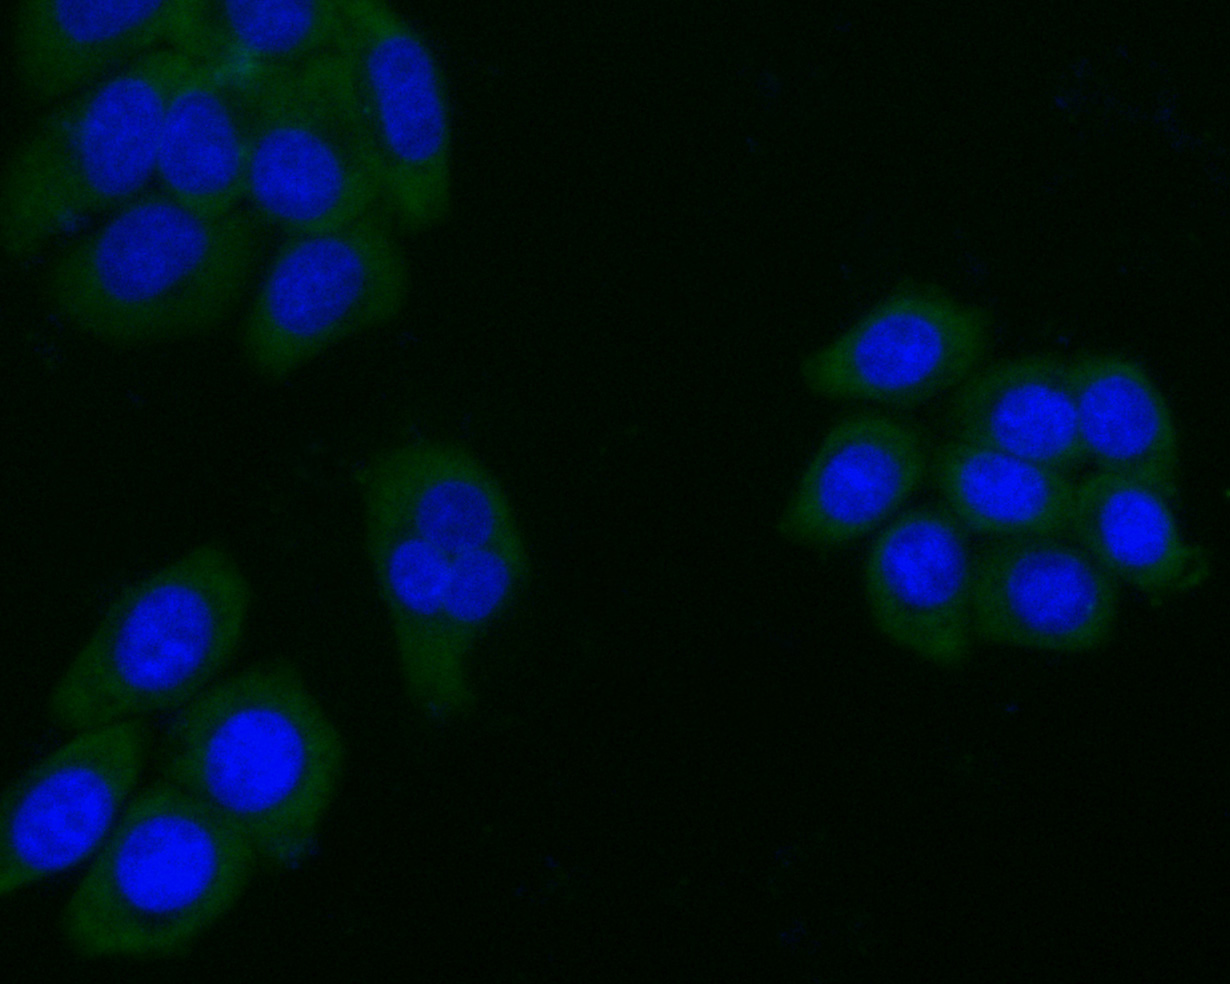 ICC staining of ARF1 in HepG2 cells (green). Formalin fixed cells were permeabilized with 0.1% Triton X-100 in TBS for 10 minutes at room temperature and blocked with 1% Blocker BSA for 15 minutes at room temperature. Cells were probed with the primary antibody (0807-7, 1/100) for 1 hour at room temperature, washed with PBS. Alexa Fluor®488 Goat anti-Rabbit IgG was used as the secondary antibody at 1/100 dilution. The nuclear counter stain is DAPI (blue).